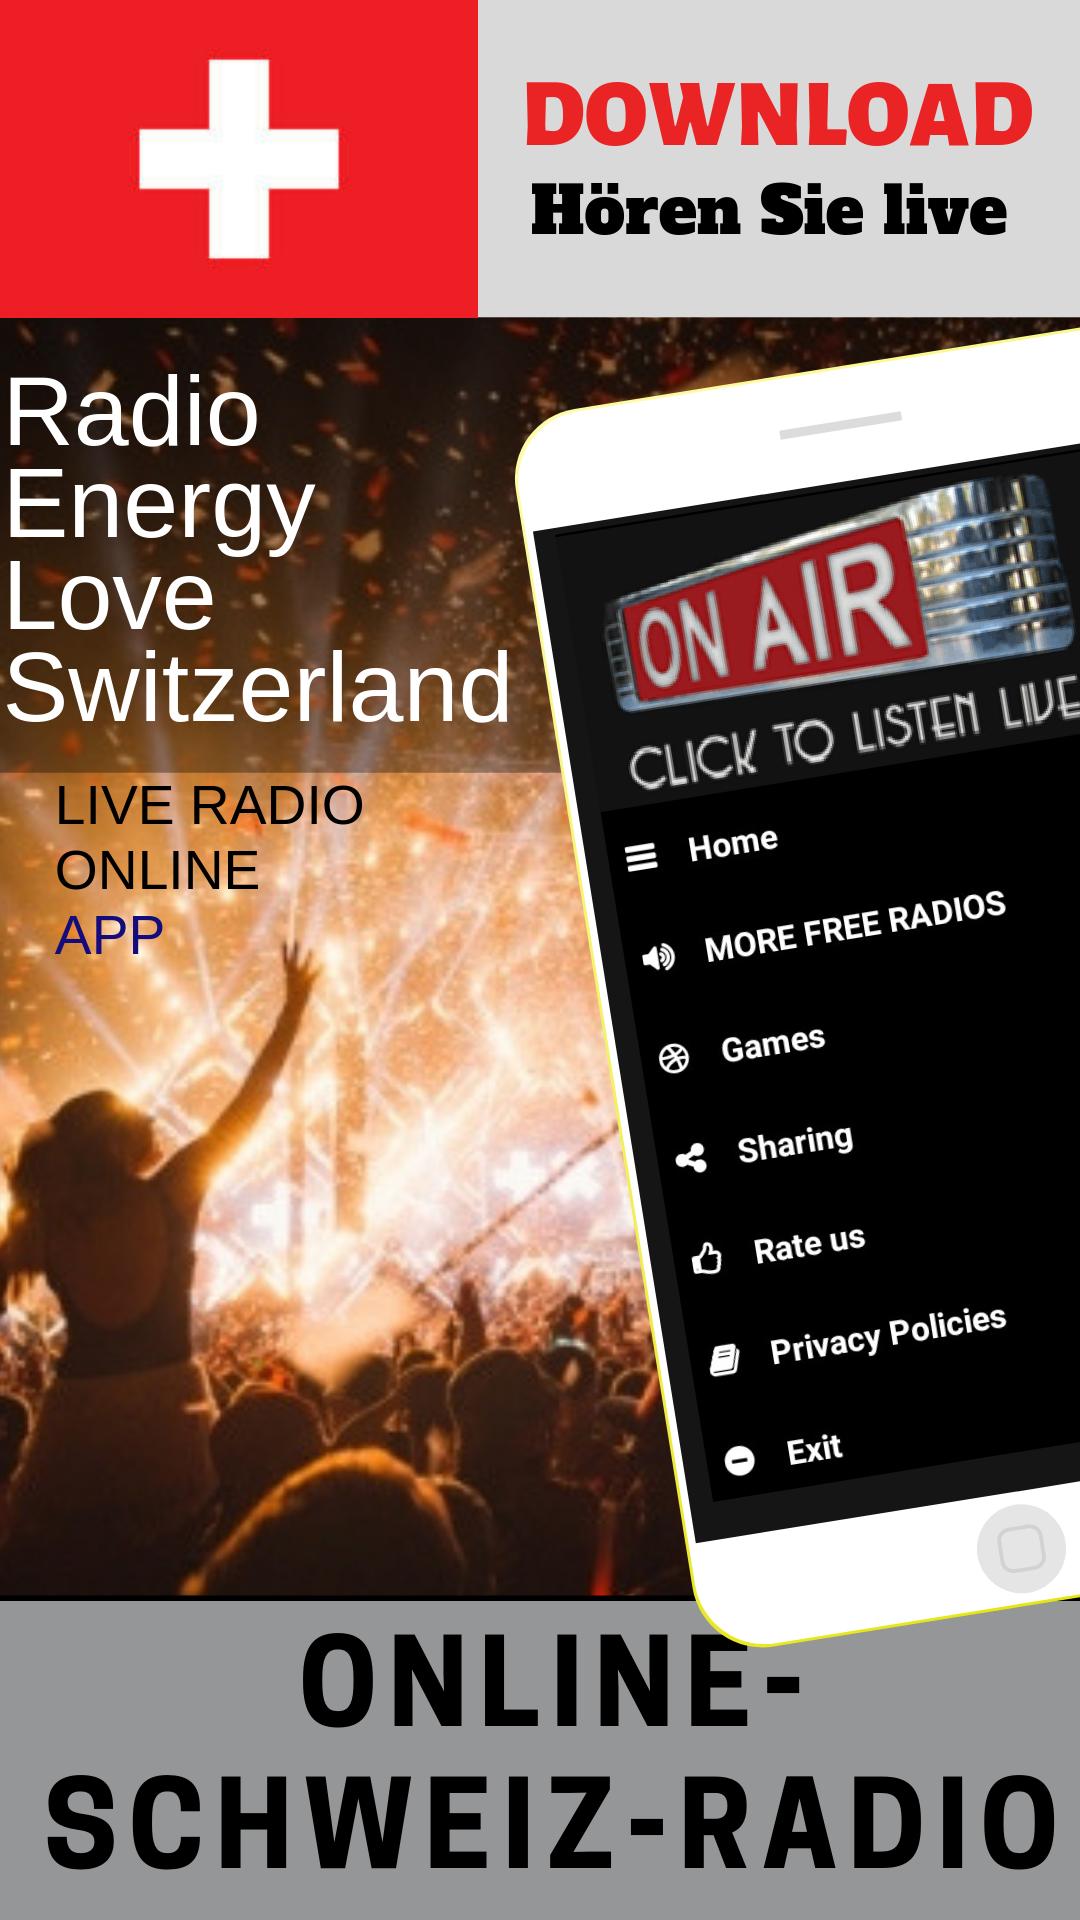 Radio Energy Love Switzerland Free Online for Android - APK Download